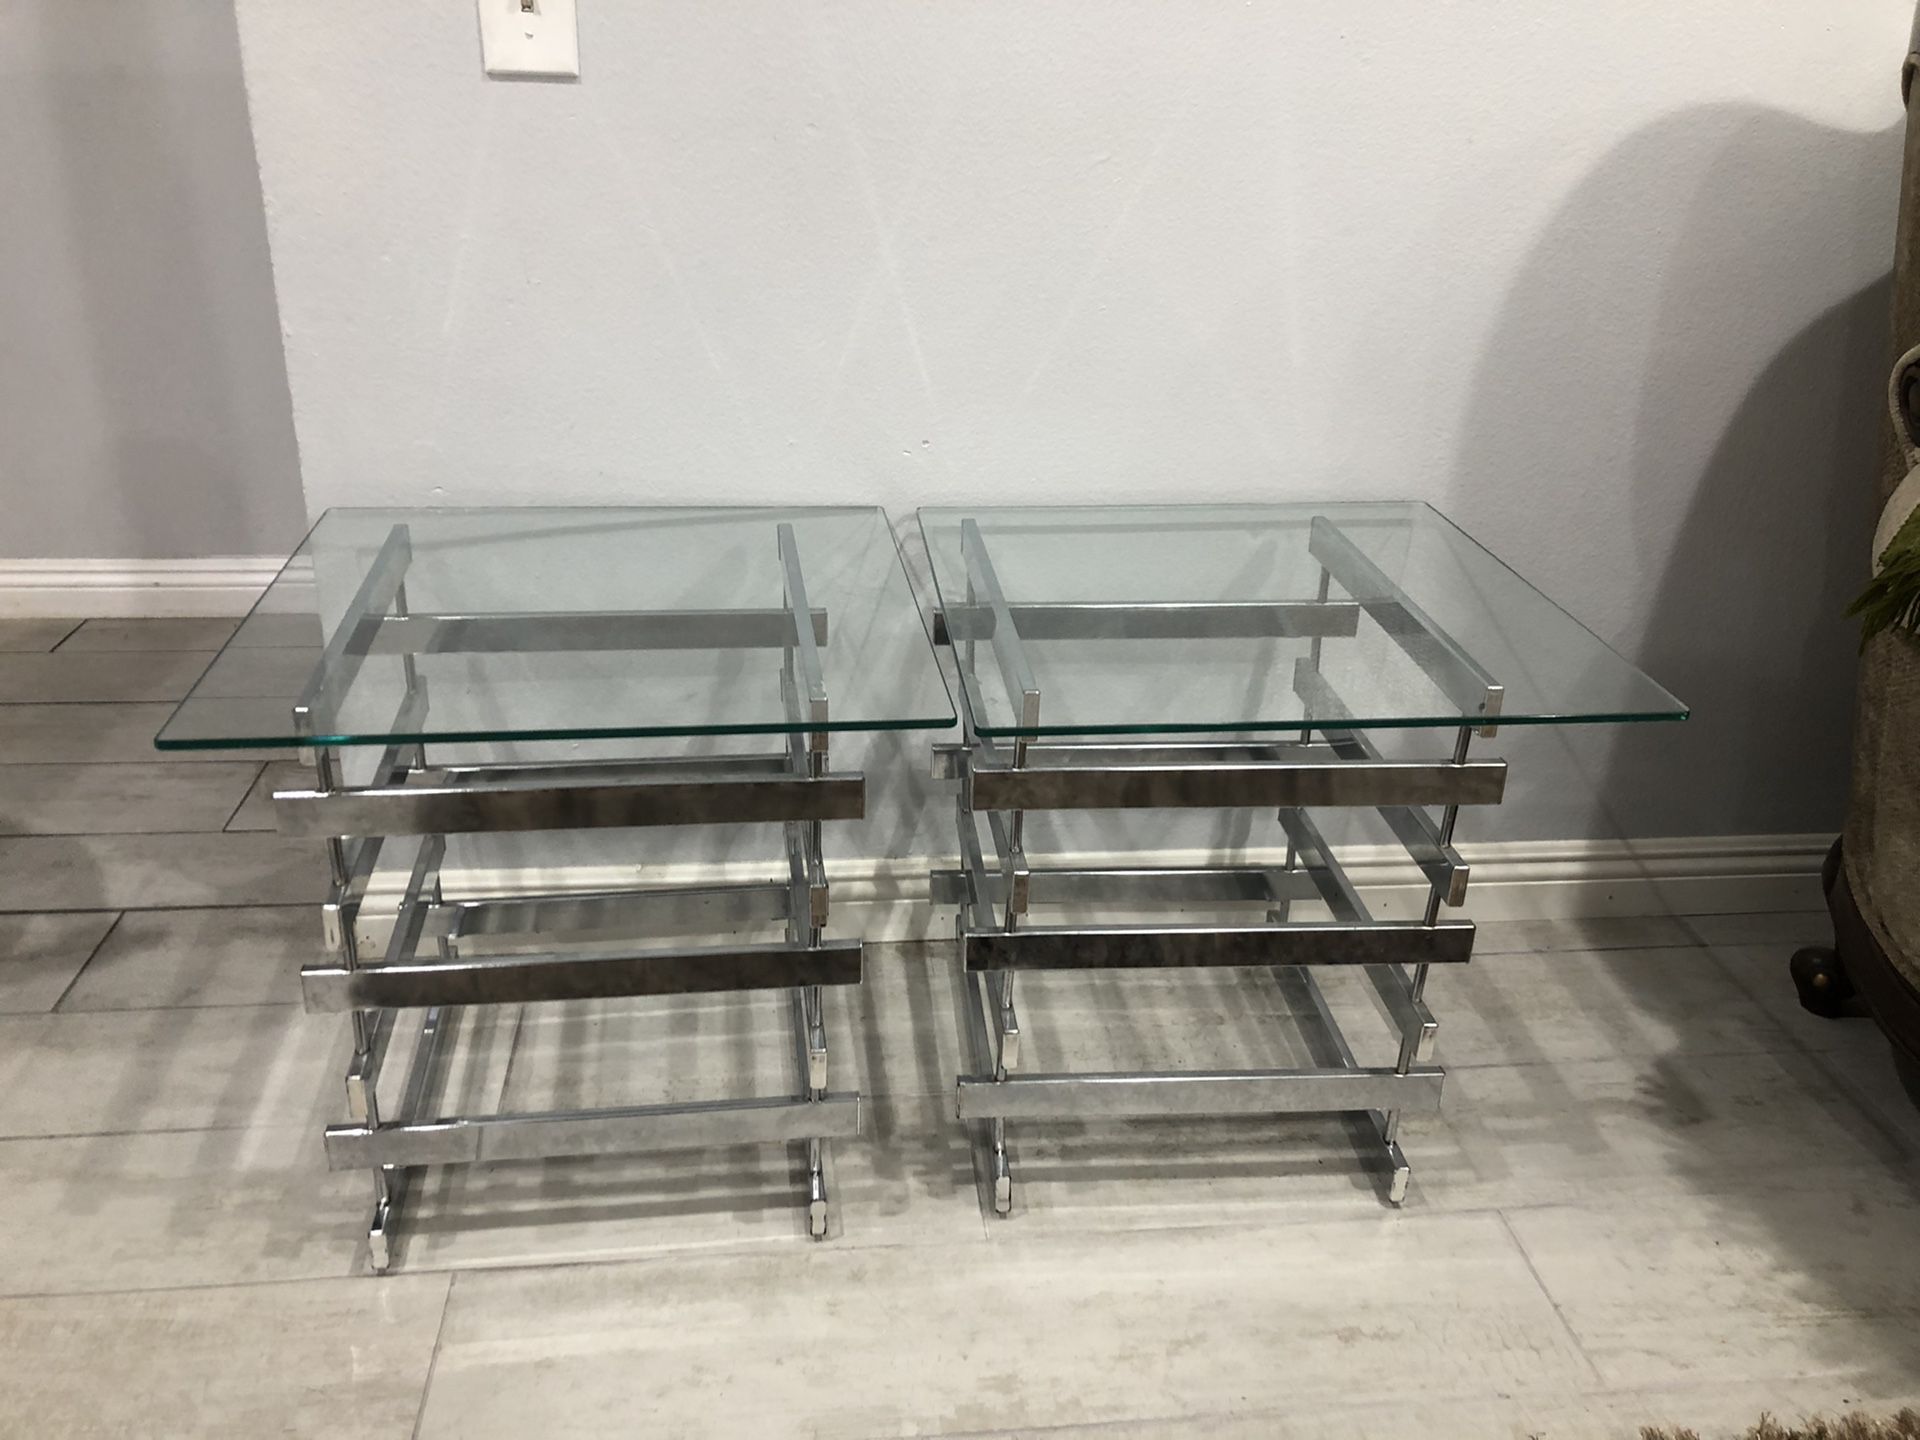 Two Silver Chrome Glass Dining Room Side Tables Very Compact and Light Weight 20x21